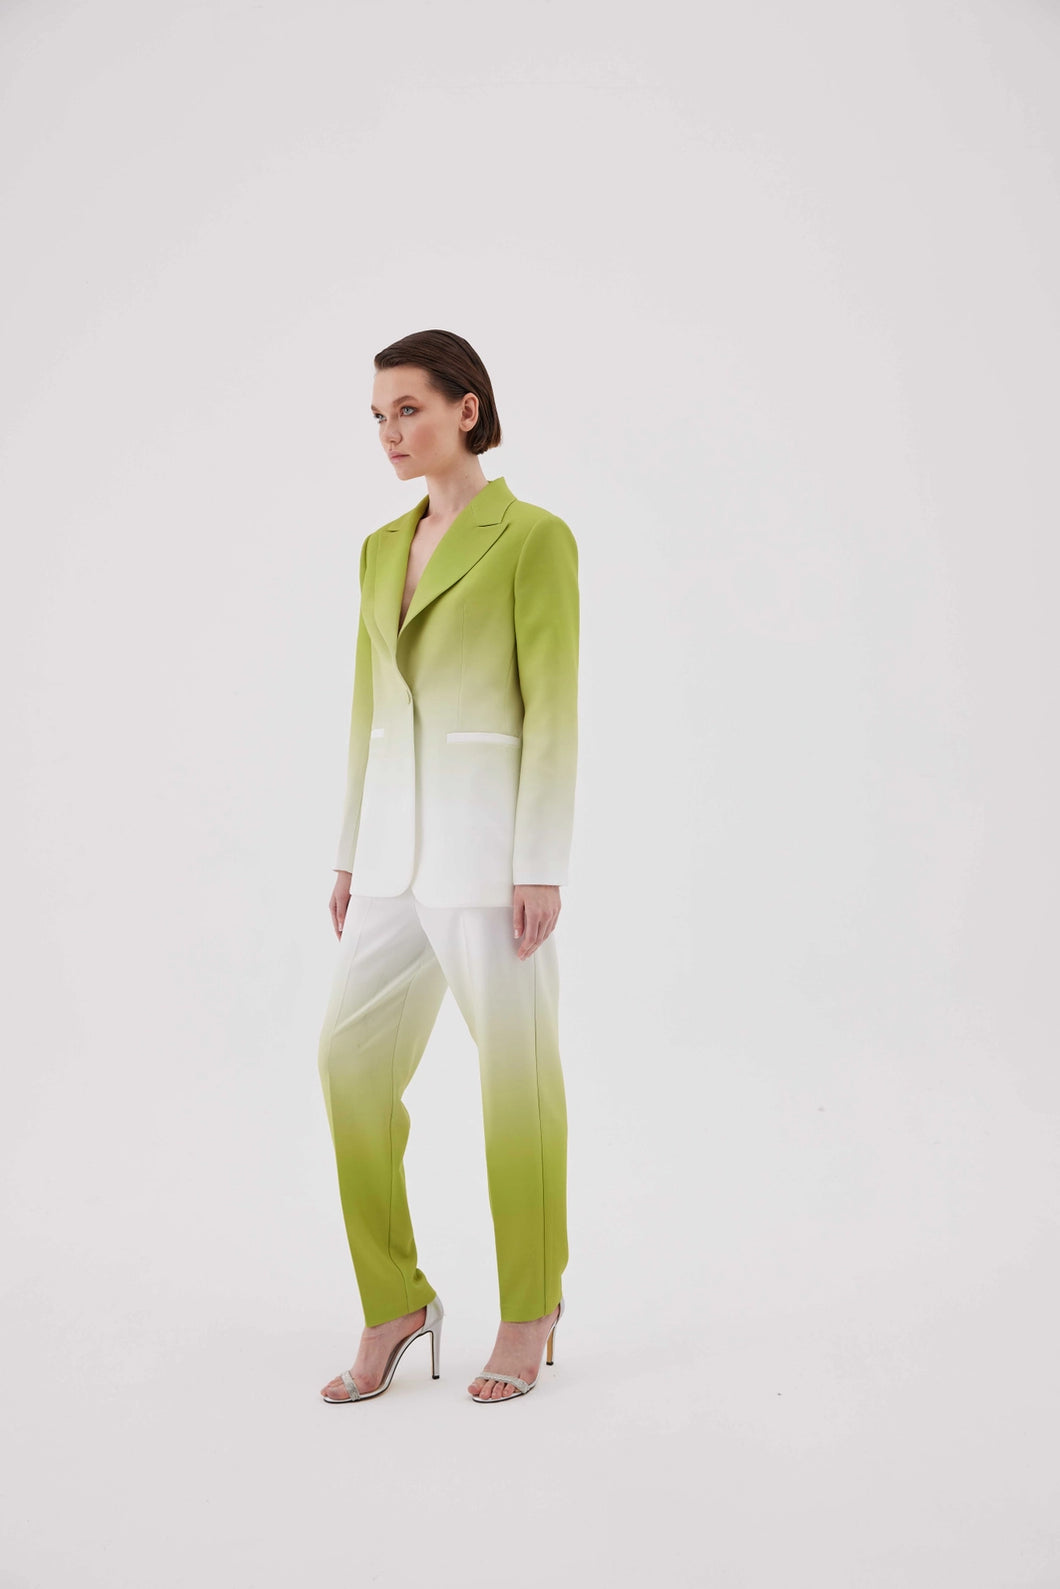 Ombre Green and White Suit